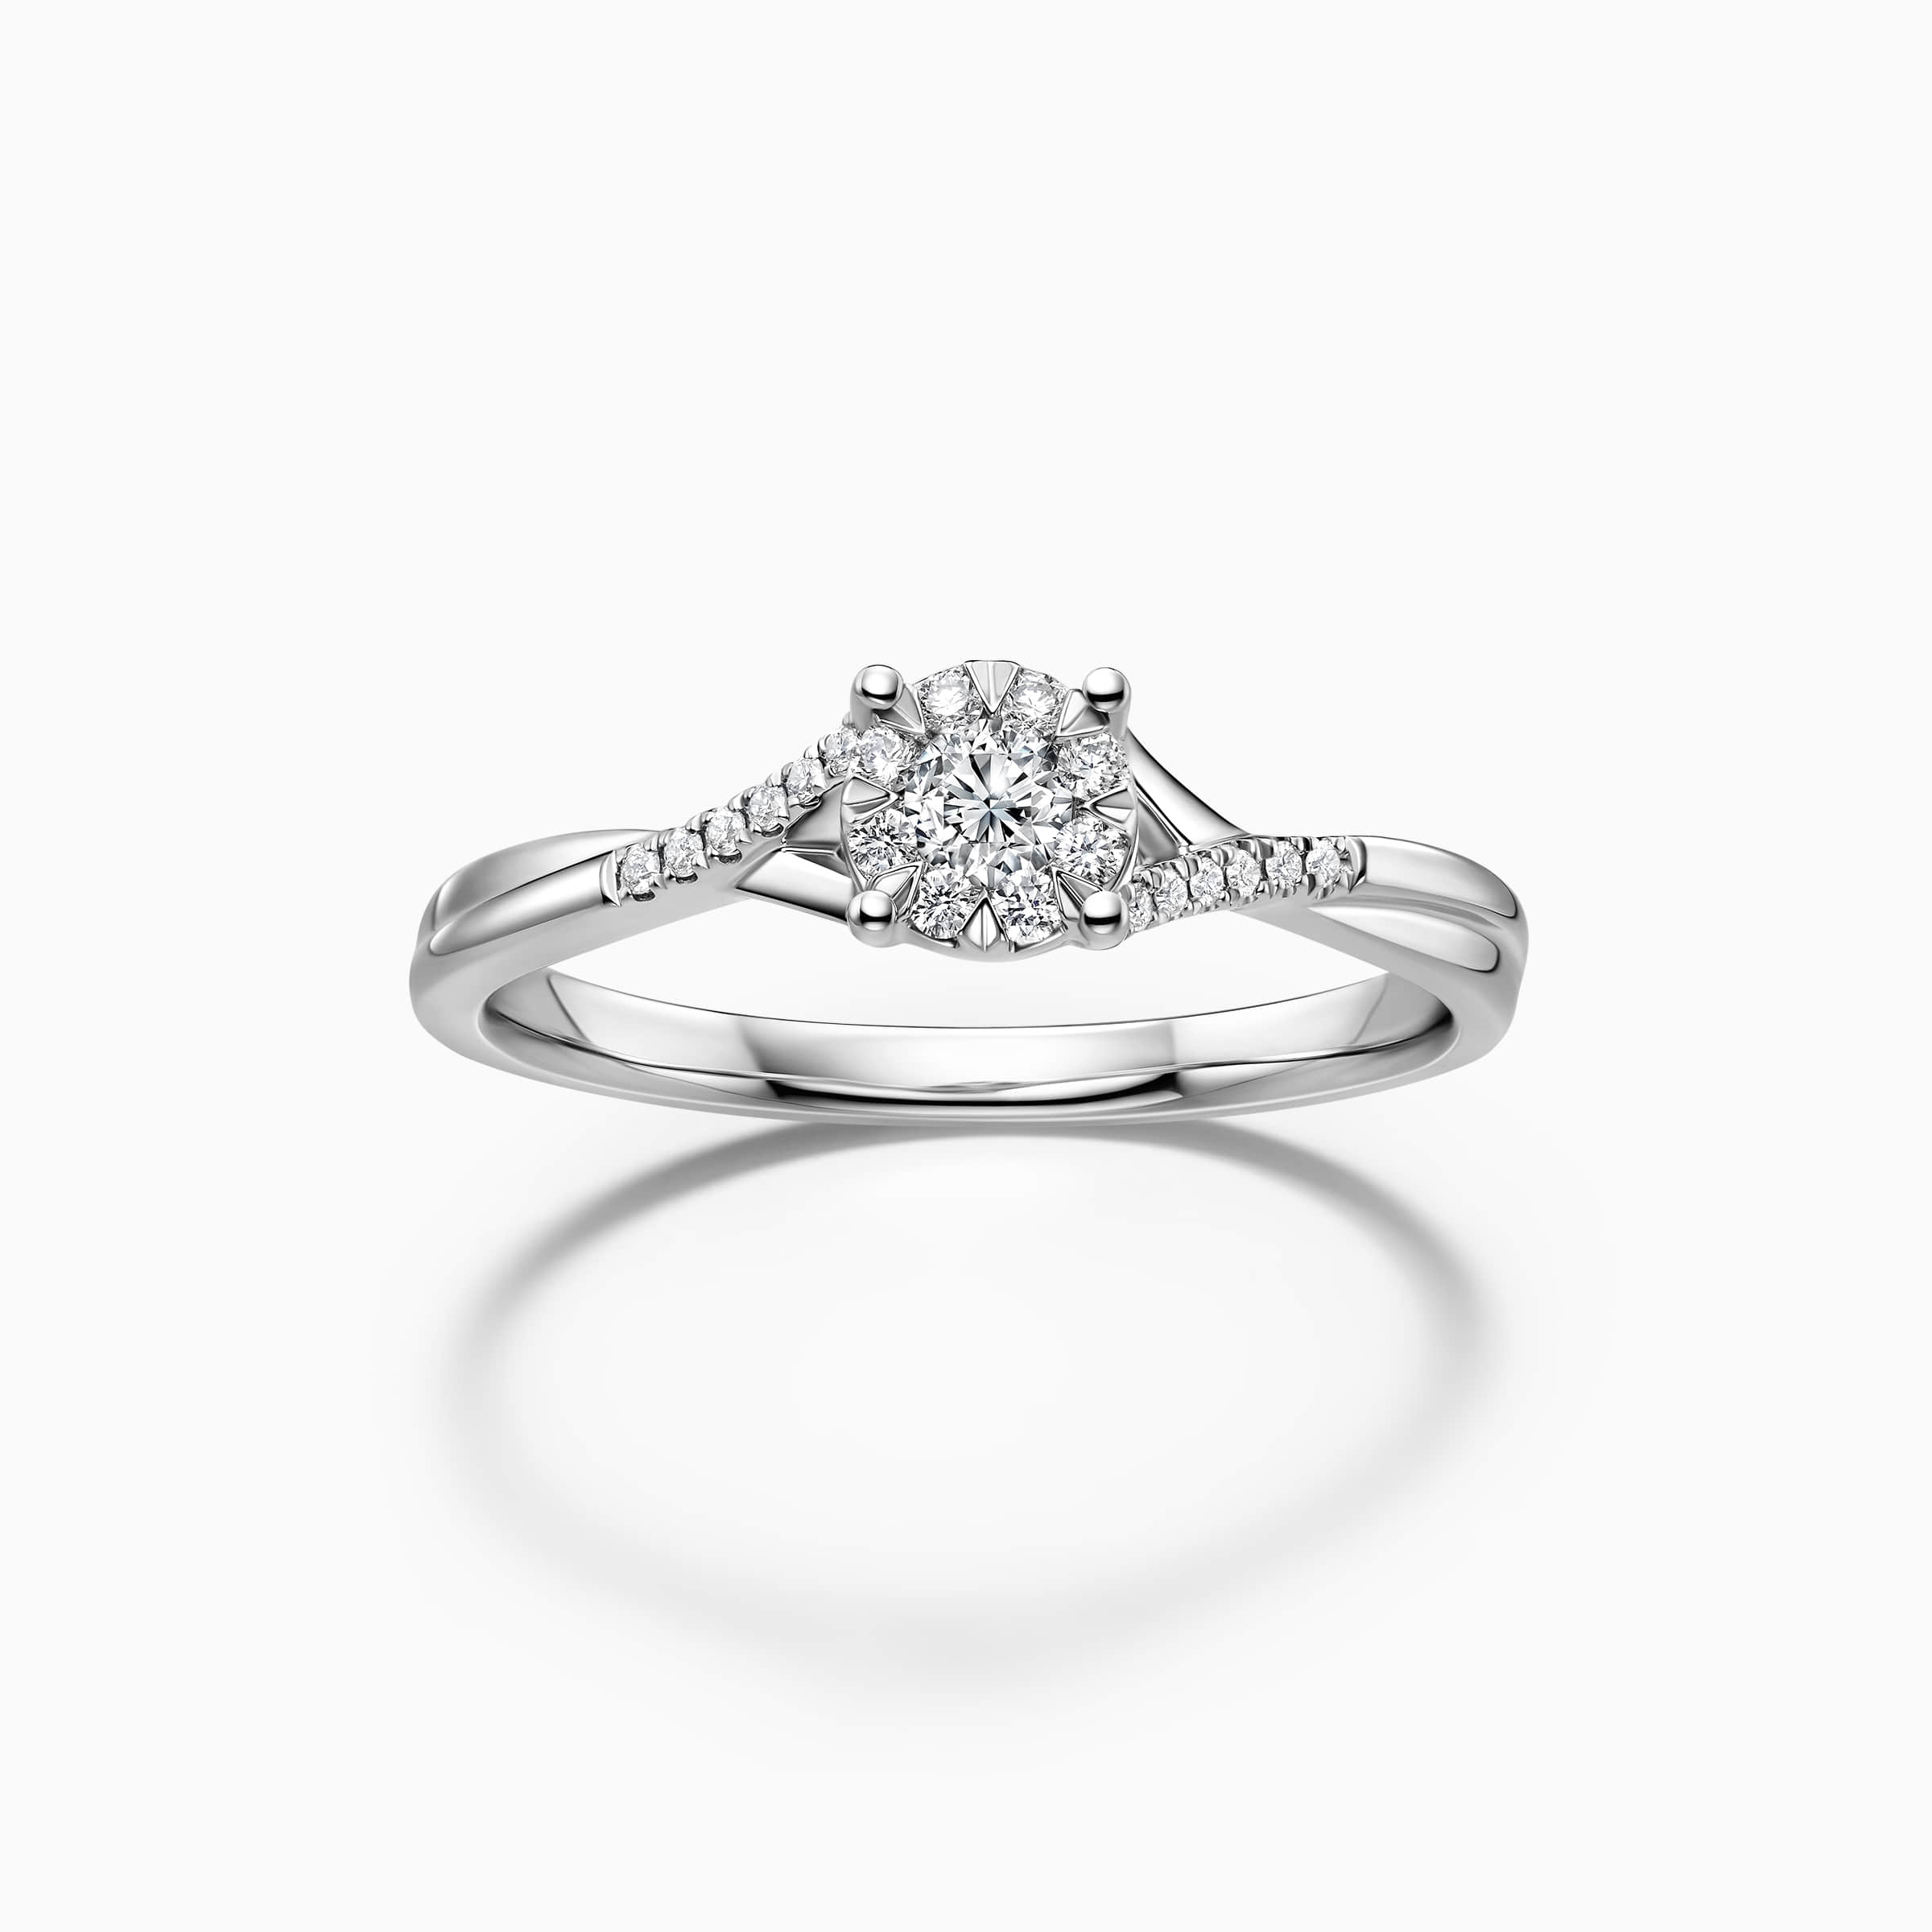 Darry Ring dainty promise ring white gold